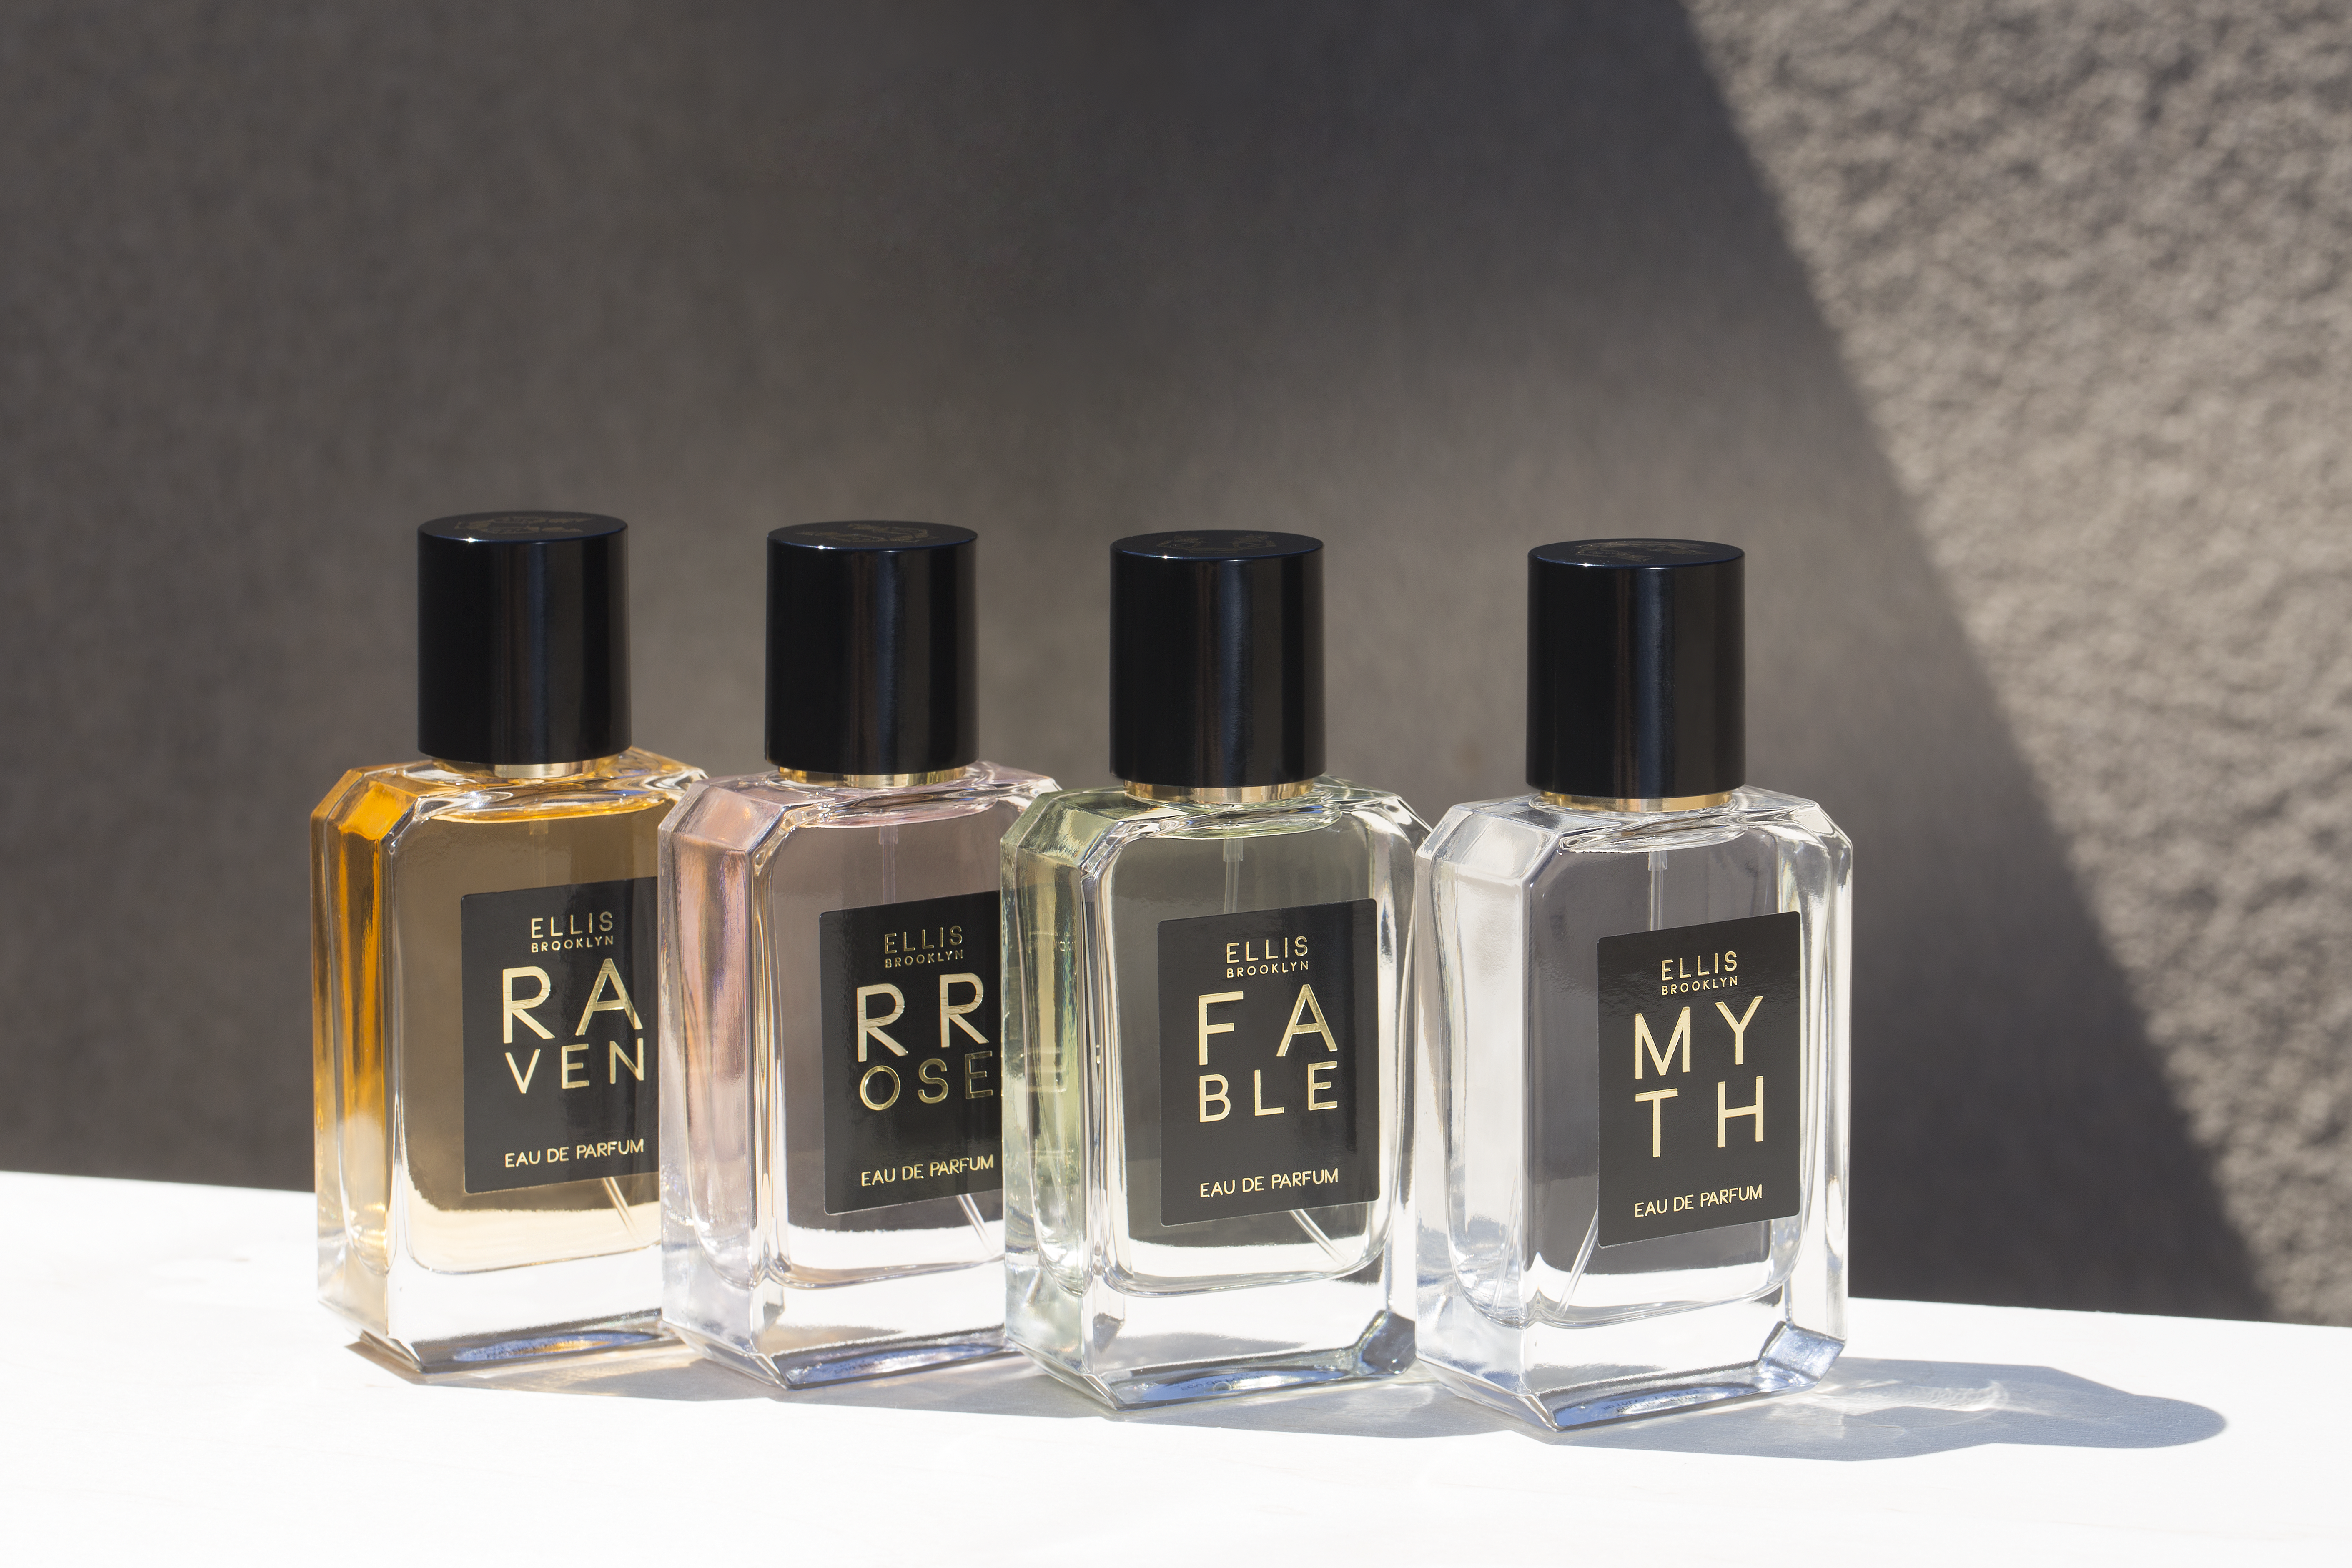 From Pacific Palisades to Brooklyn, How I Discovered My Signature Perfume